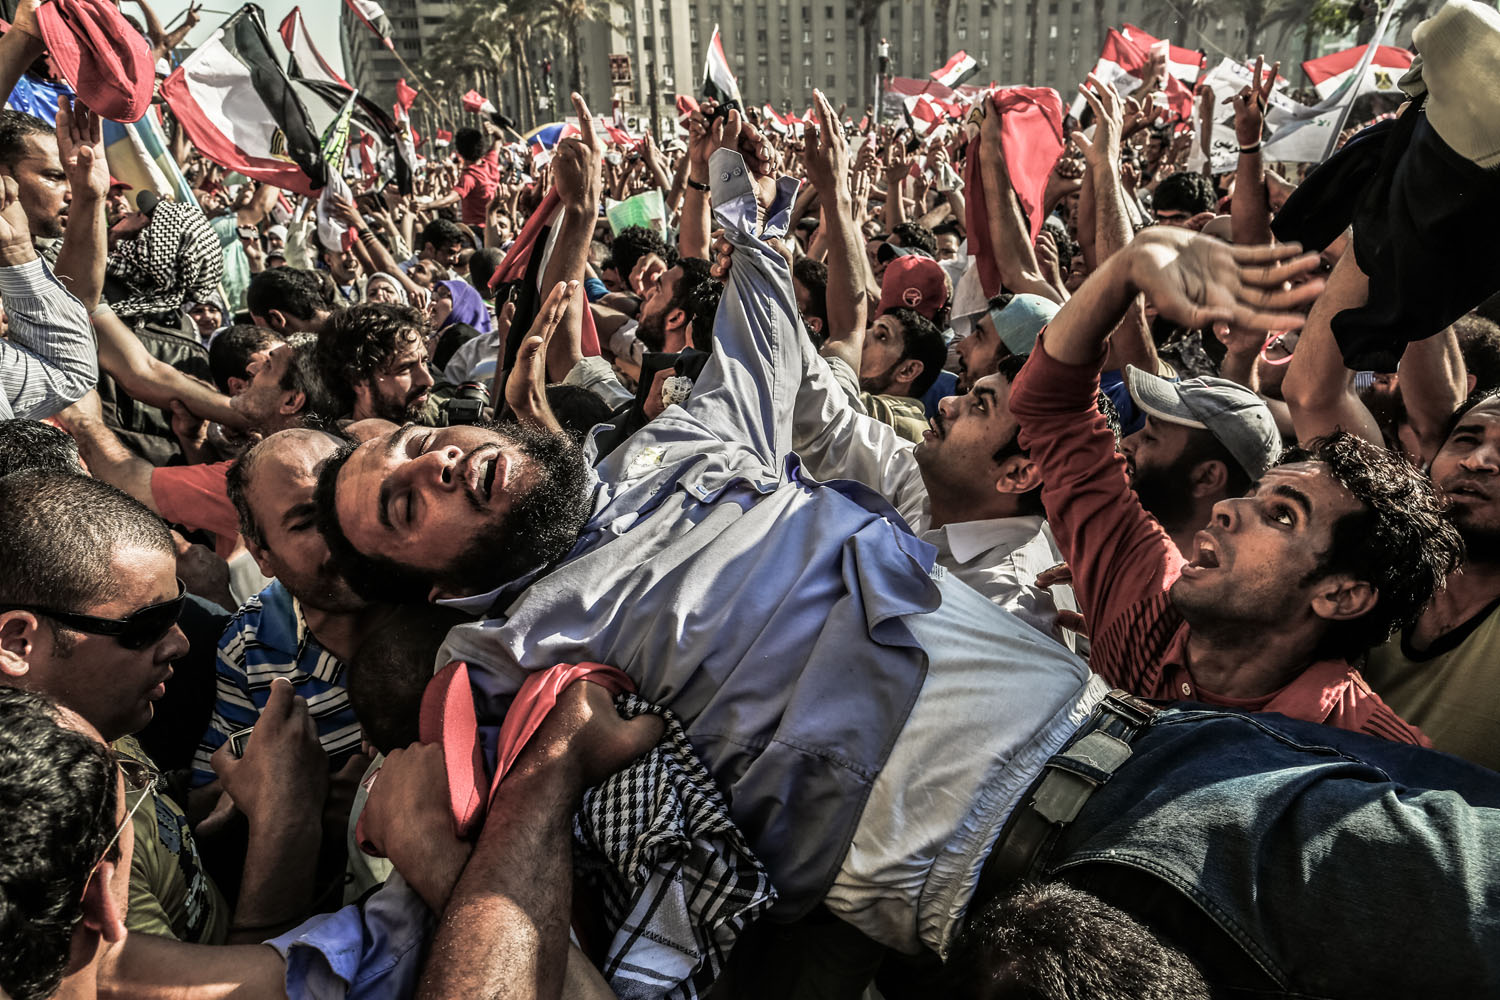 June 24, 2012, Cairo. Overcome by emotion, a supporter of the Muslim Brotherhood is carried onto the stage as Egyptians celebrate the election of their new president in Tahrir Square.